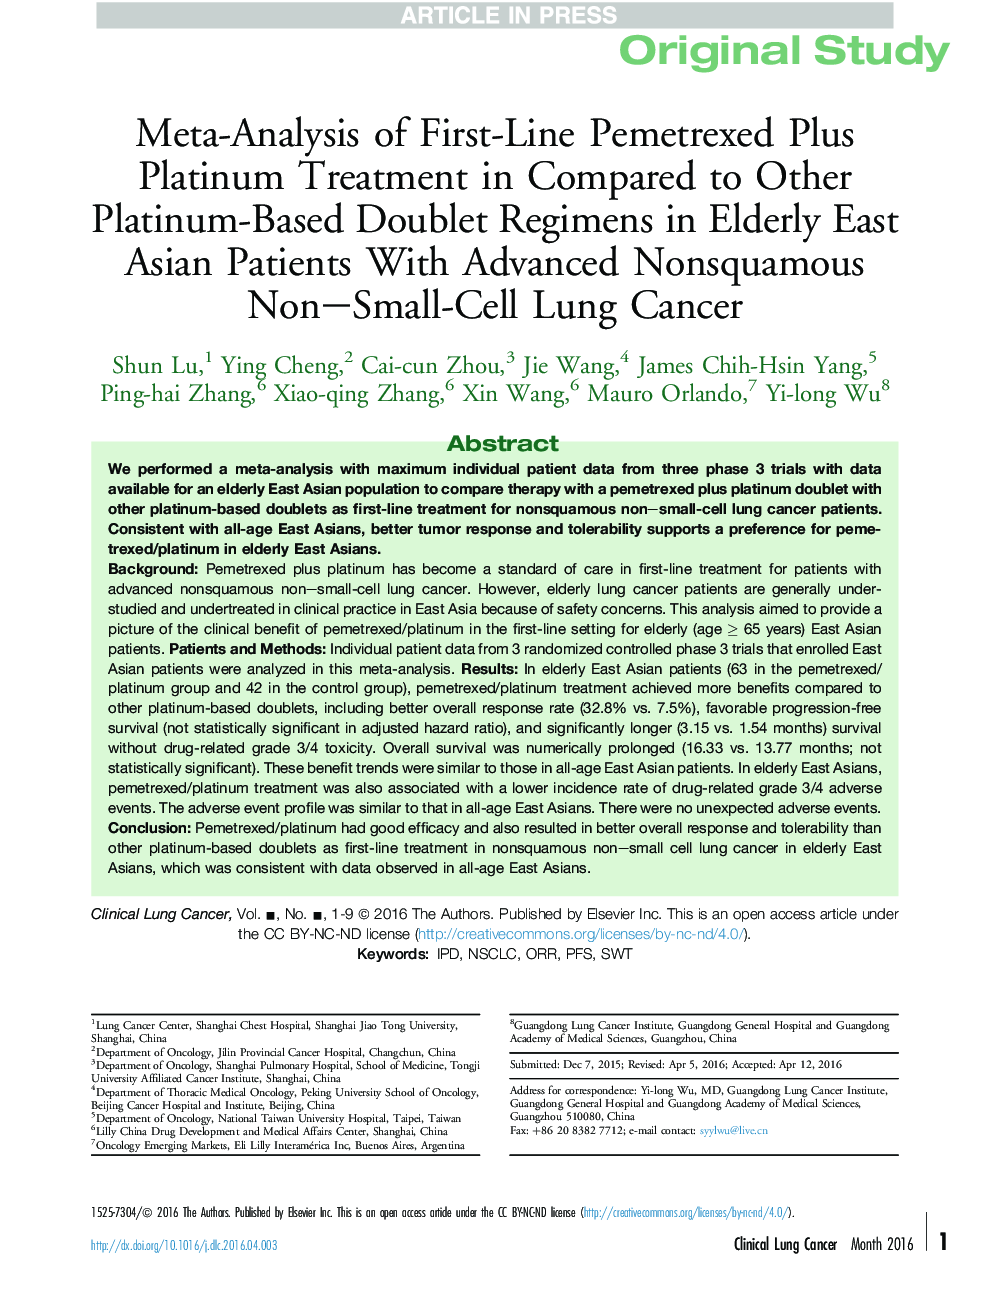 Meta-Analysis of First-Line Pemetrexed Plus Platinum Treatment in Compared to Other Platinum-Based Doublet Regimens in Elderly East Asian Patients With Advanced Nonsquamous Non-Small-Cell Lung Cancer